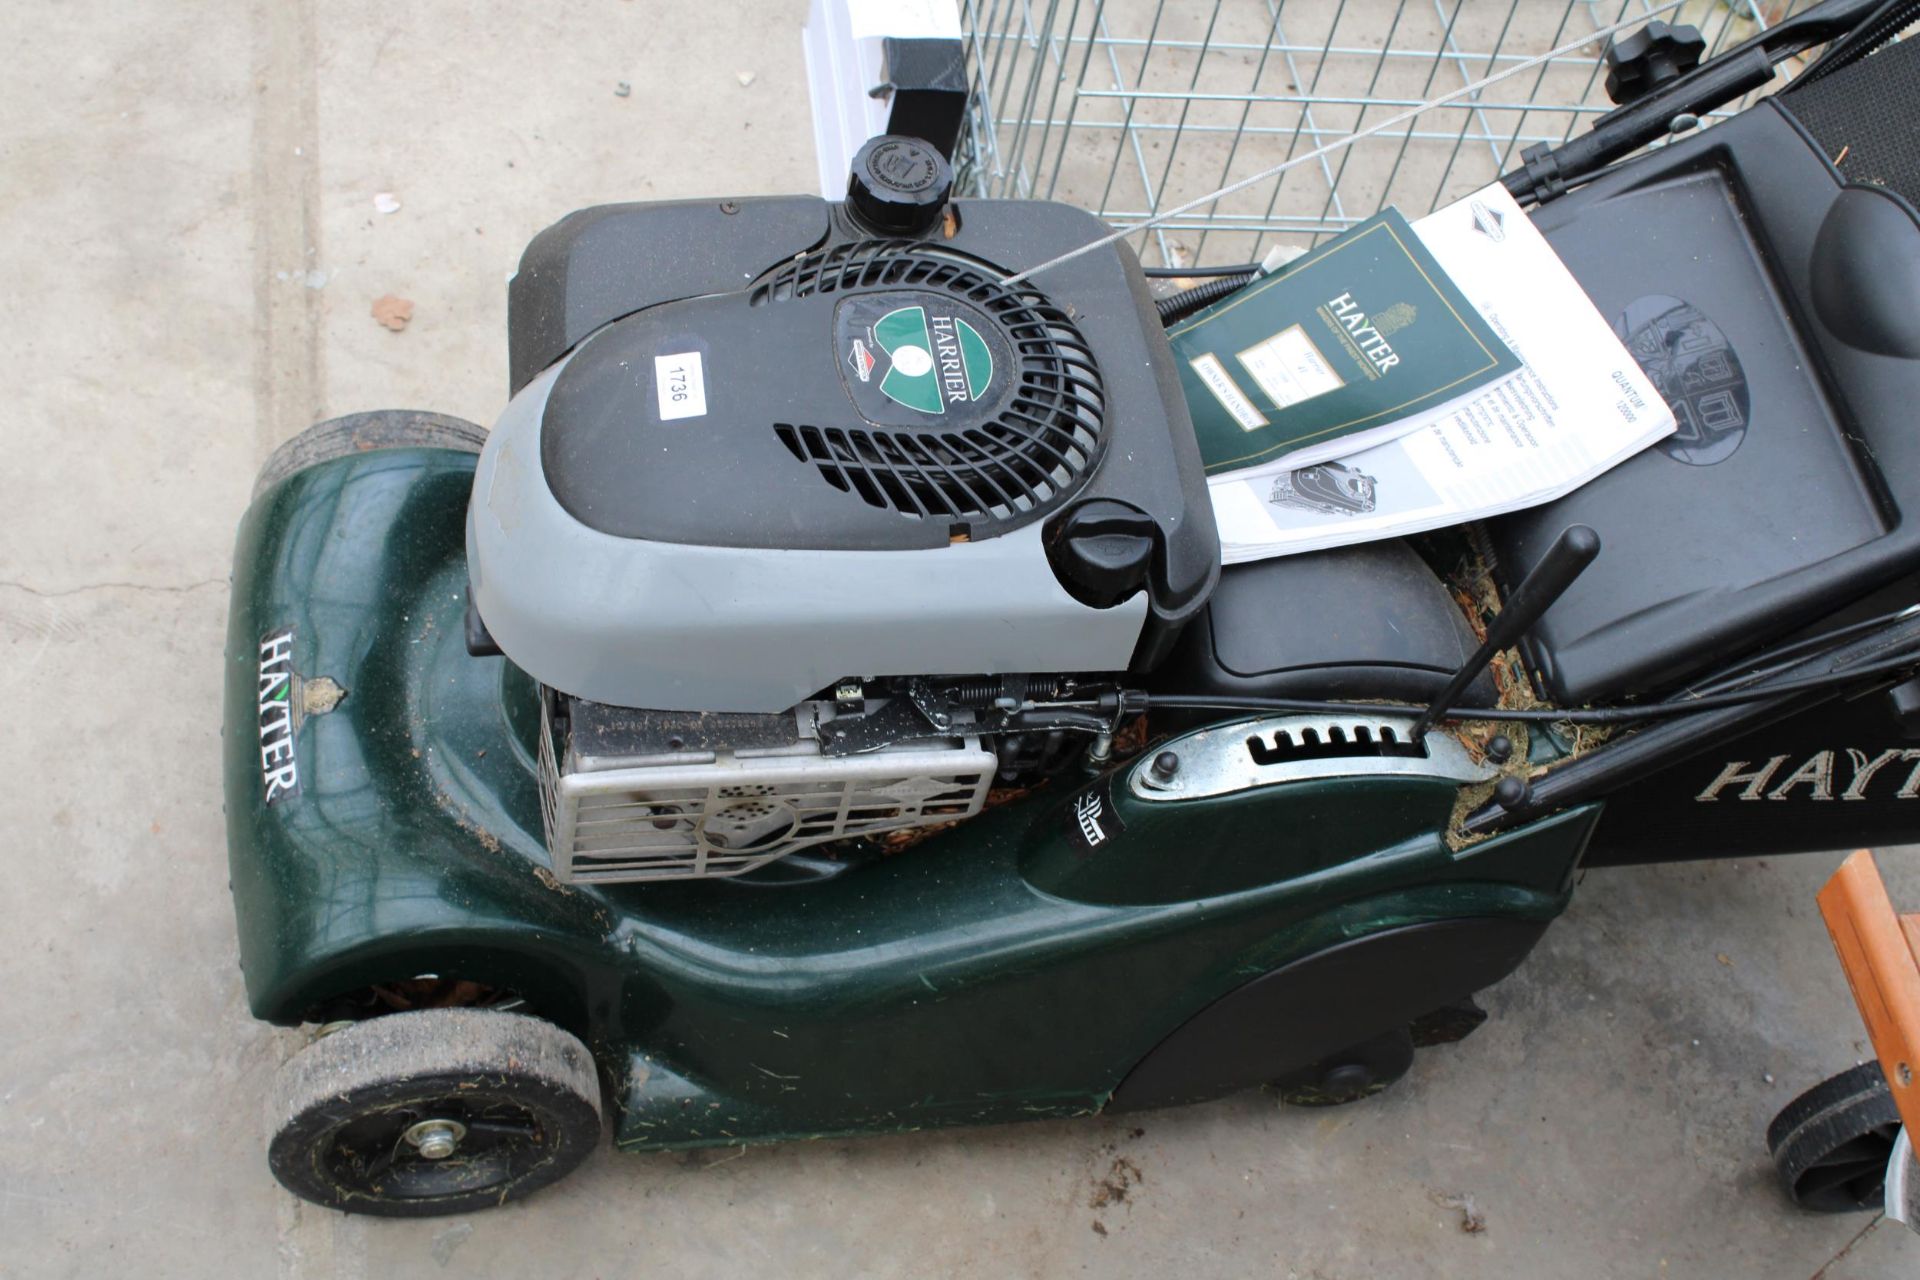 A HAYTER HARRIER 41 PETROL LAWN MOWER WITH KEY START - Image 3 of 4